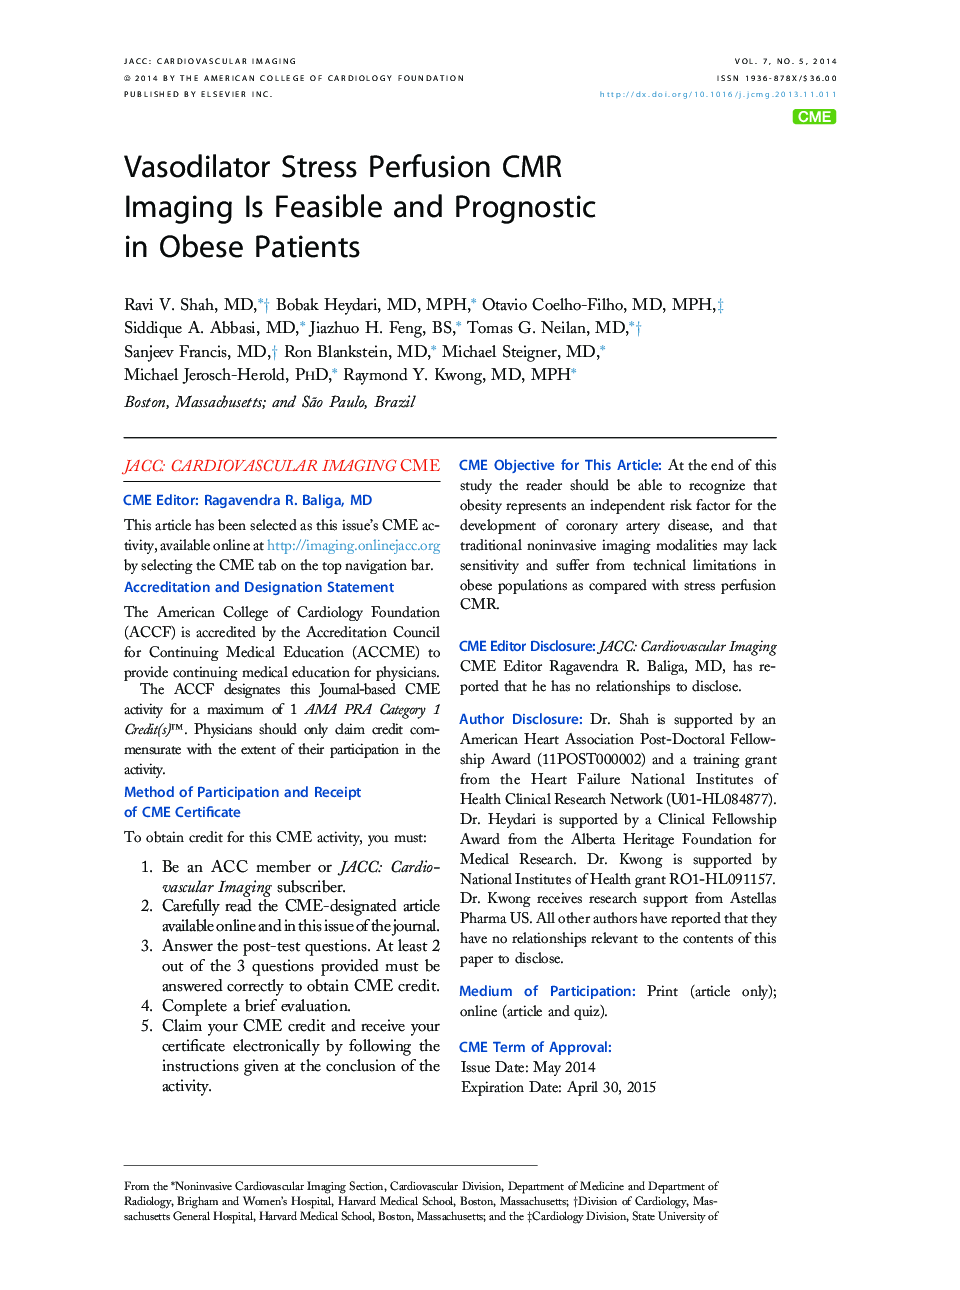 Vasodilator Stress Perfusion CMR Imaging Is Feasible and Prognostic in Obese Patients 